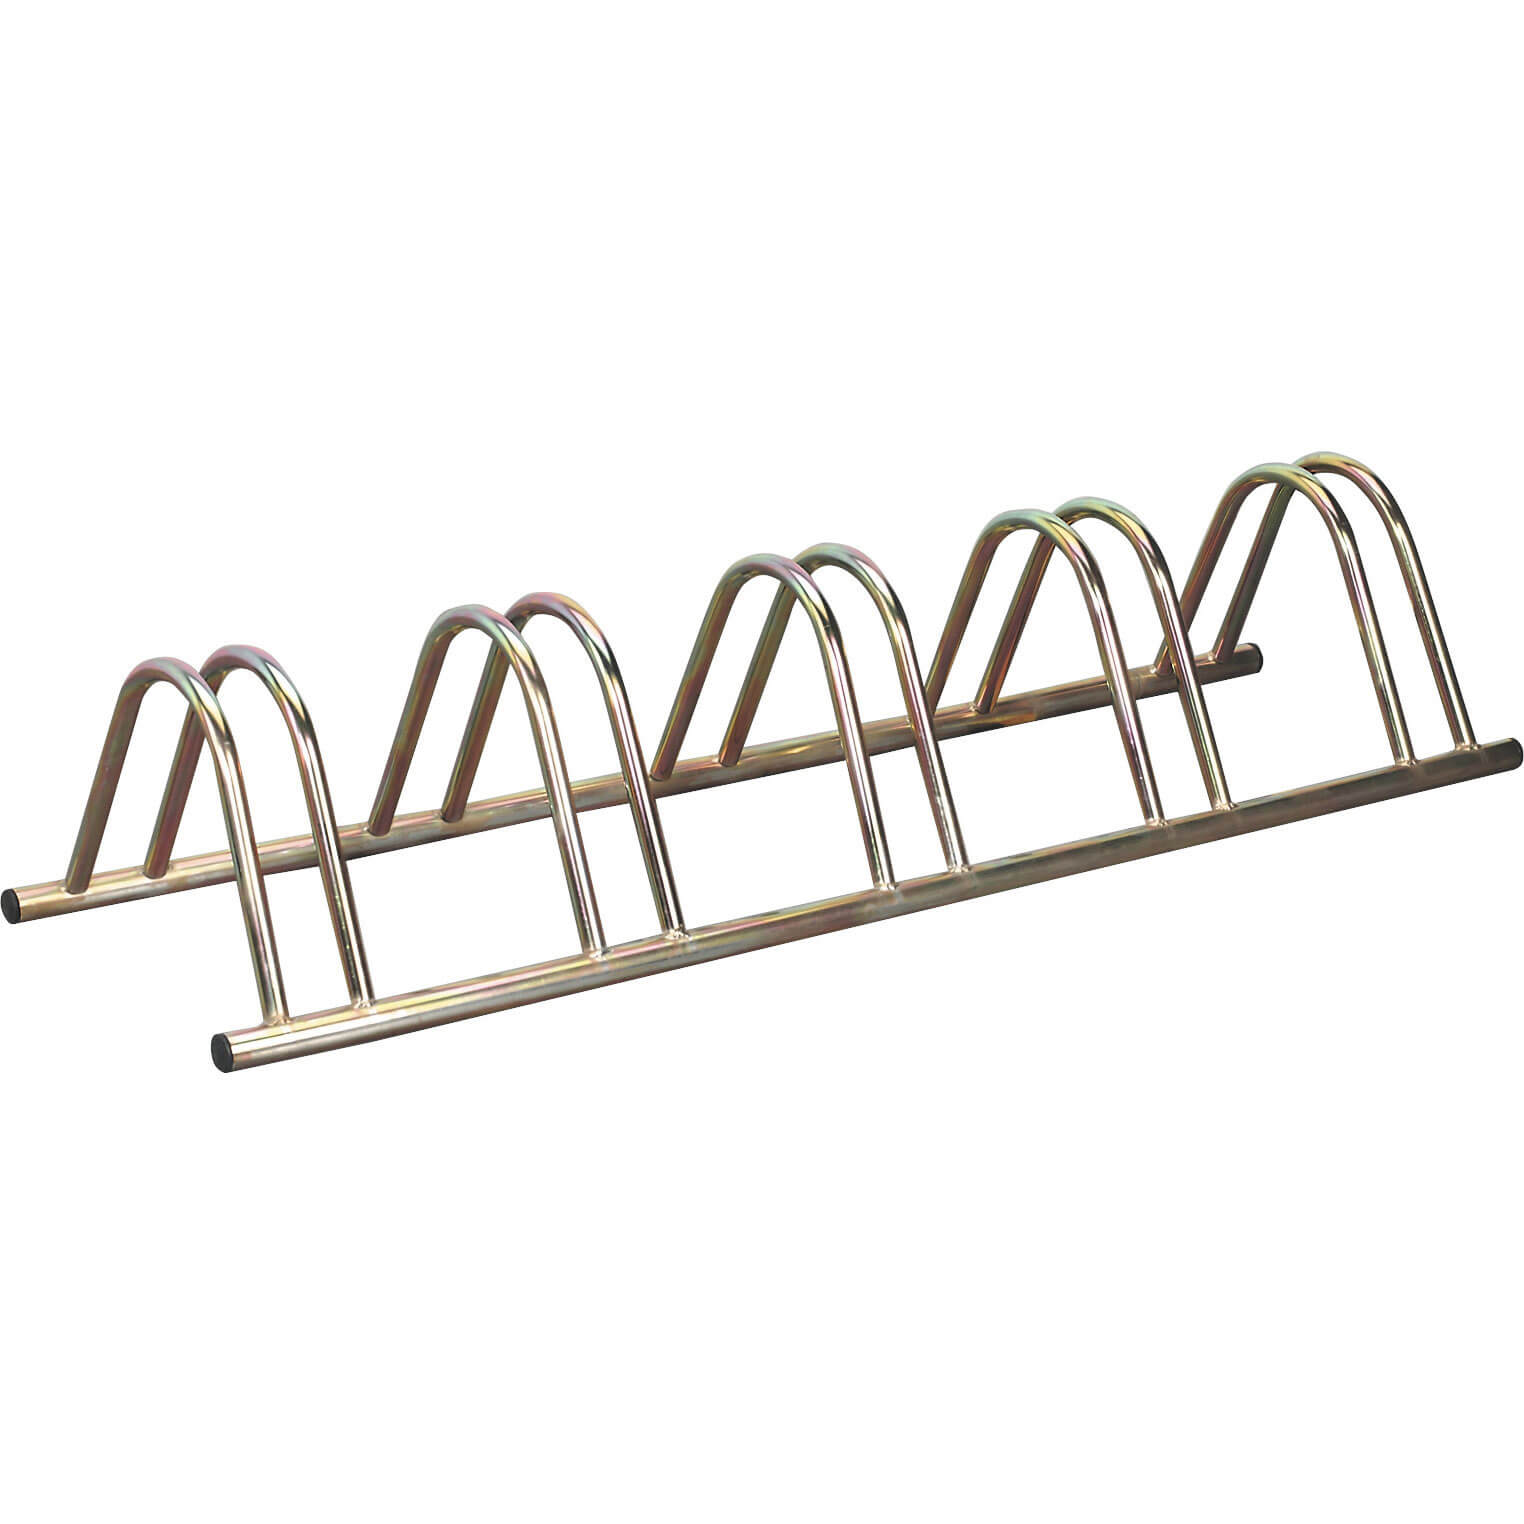 Photo of Sealey Bicycle Rack For 5 Cycles